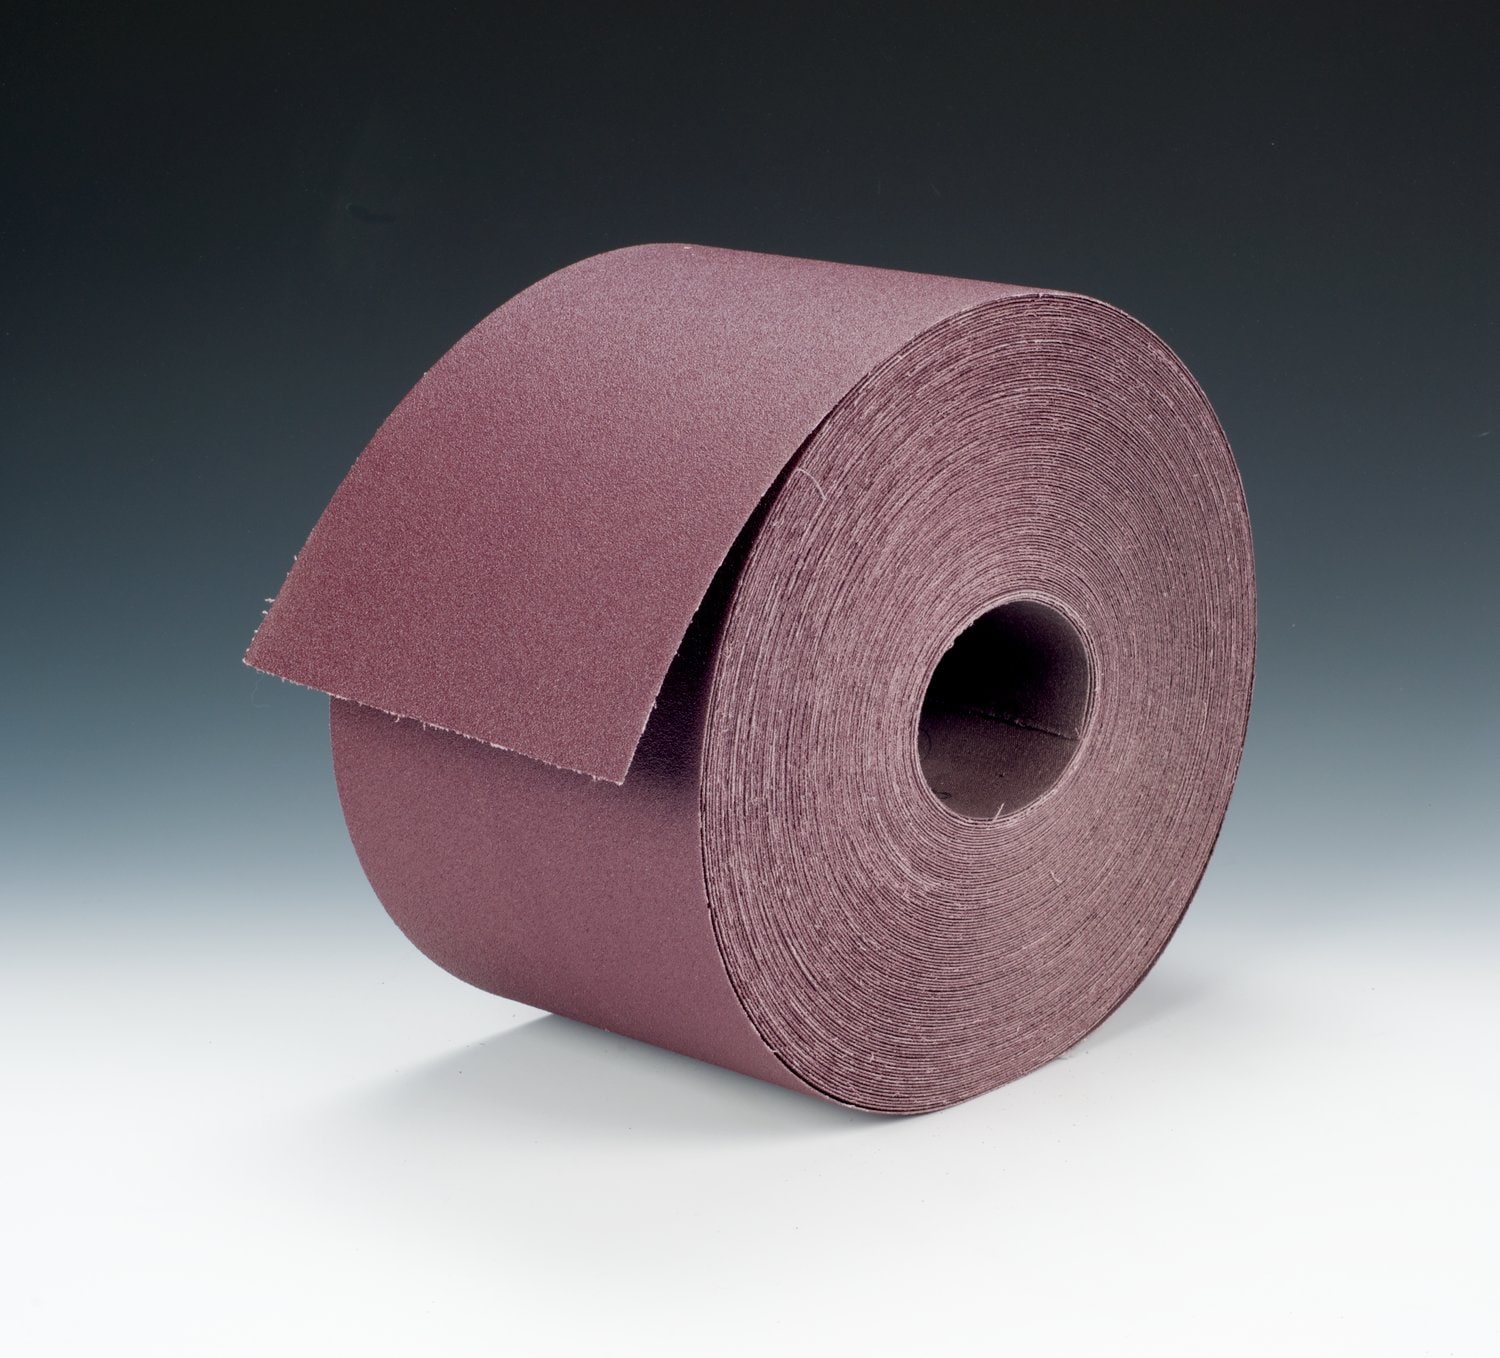 7100216265 - 3M Cloth Roll 341D, P320 X-weight, 12 in x 100 yd, Continuous Length -
No splices, 2 ea/Case